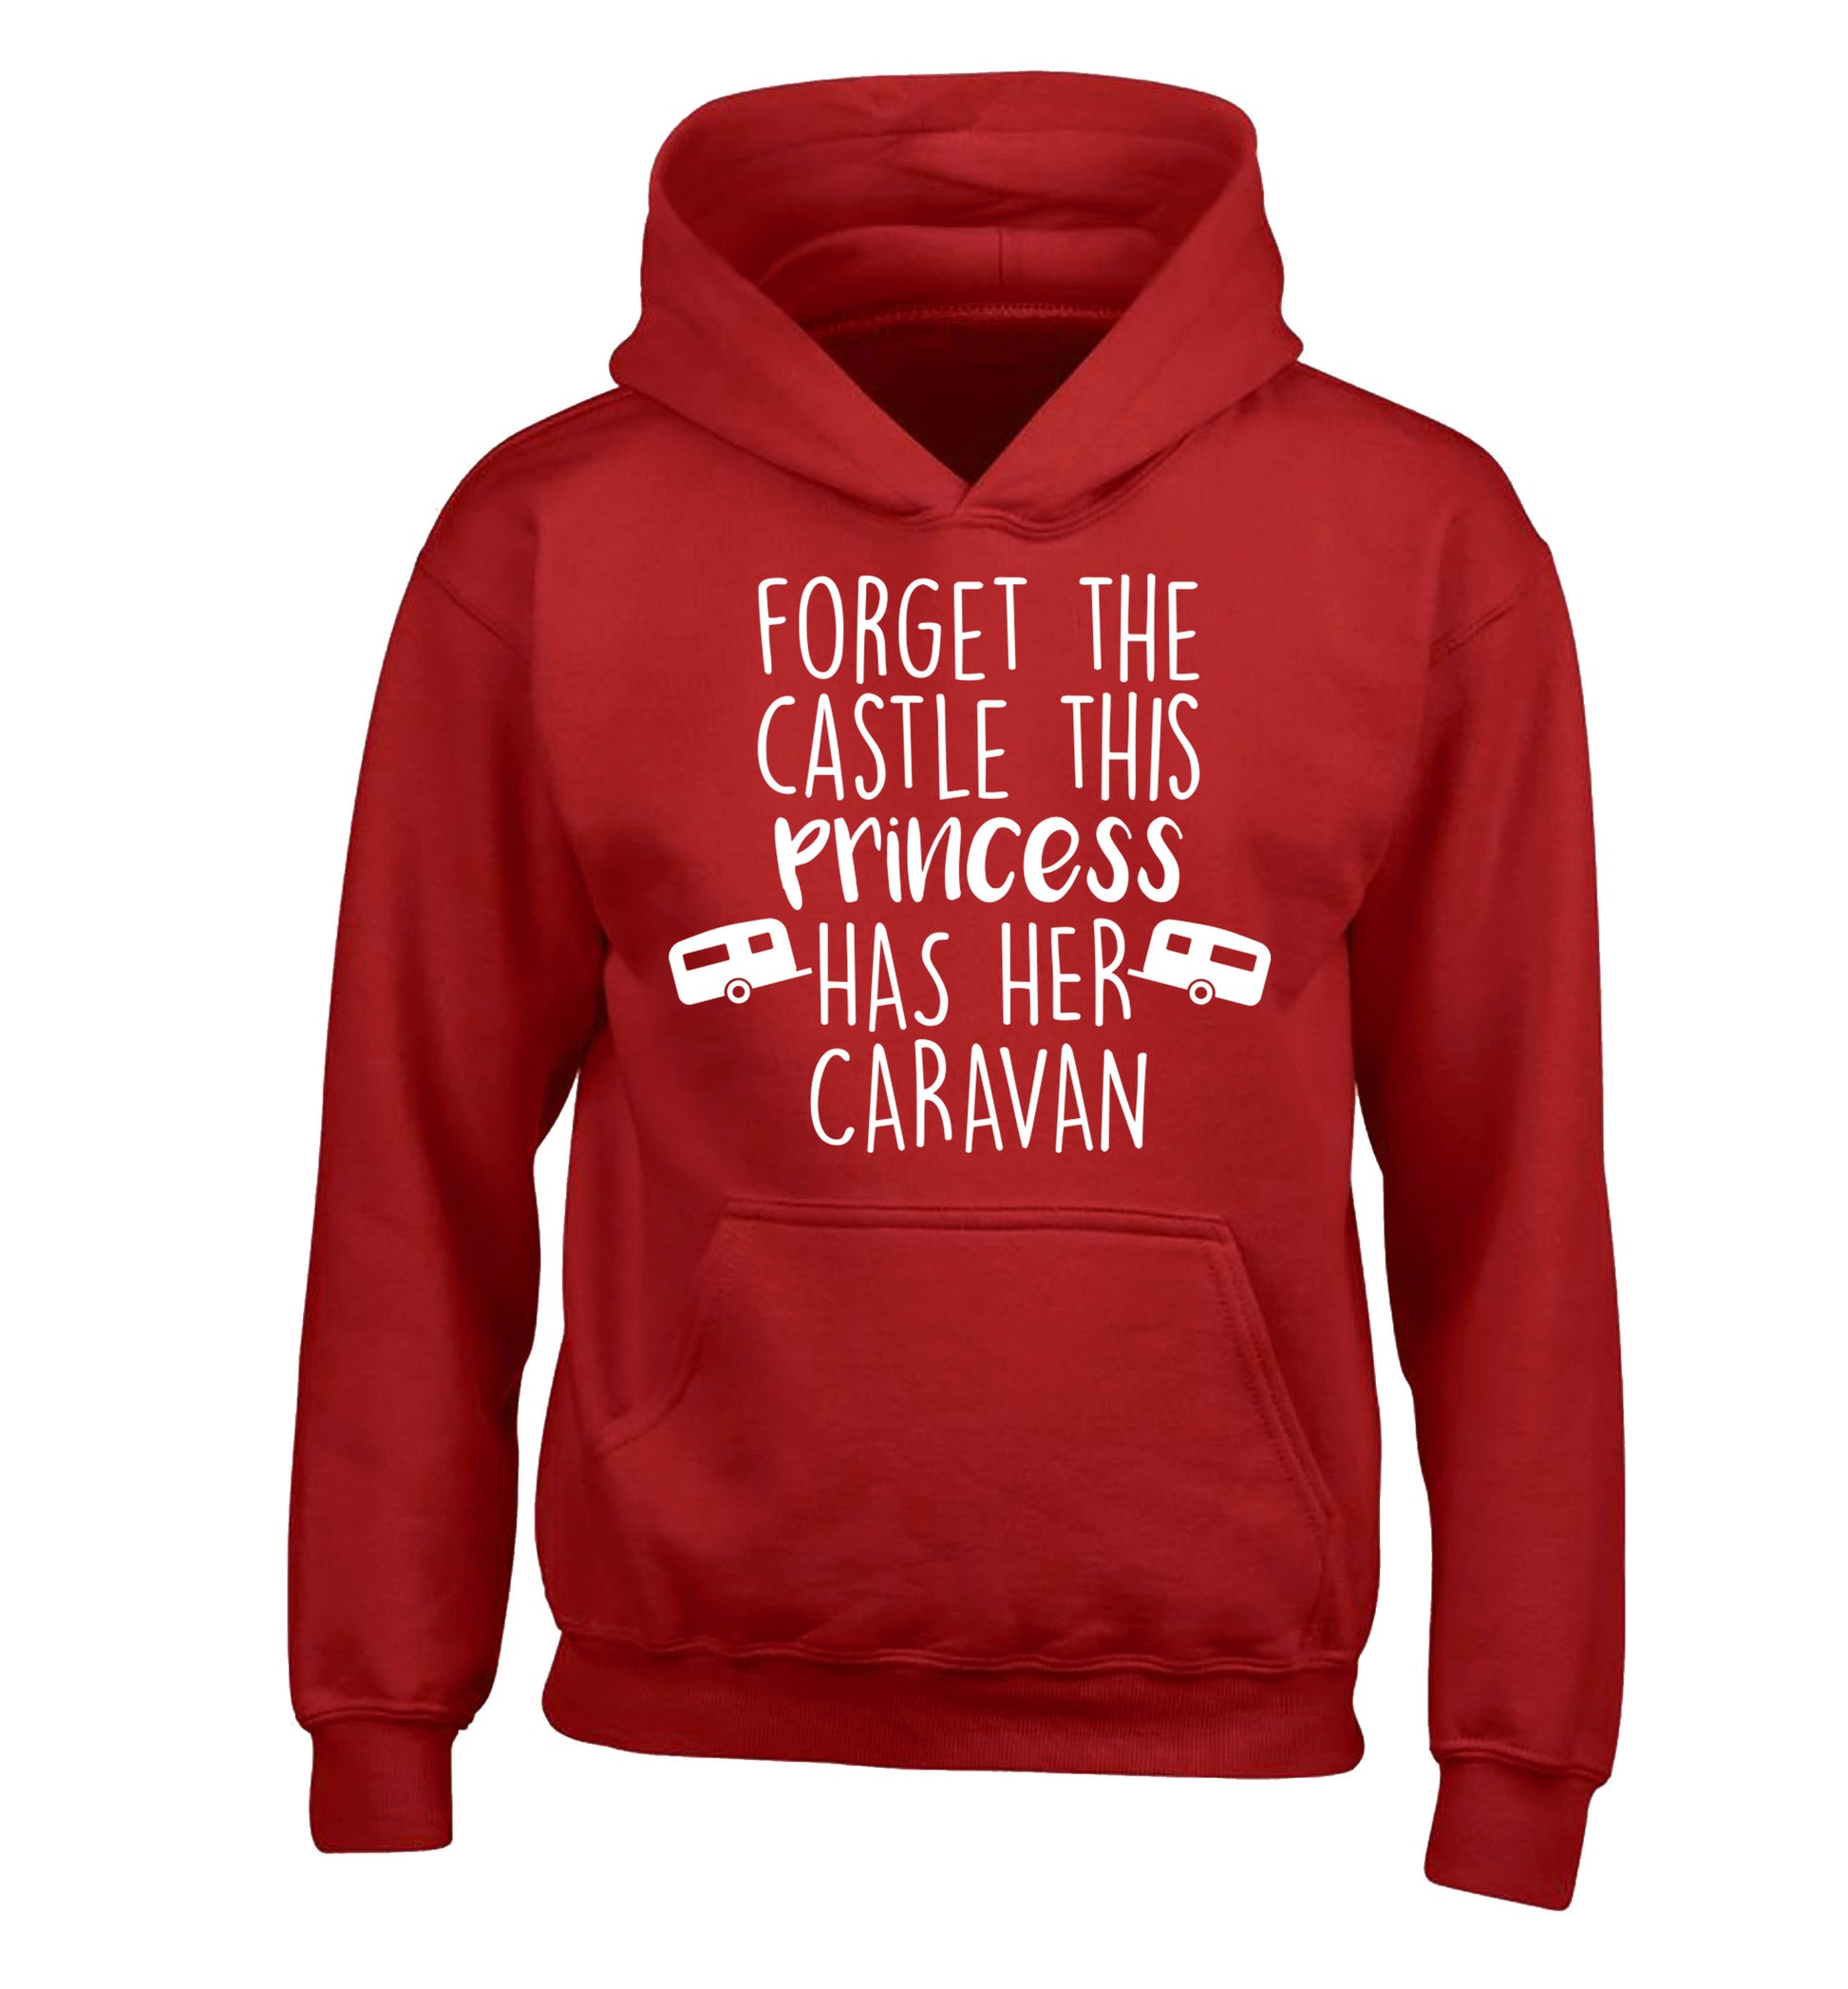 Forget the castle this princess lives at the caravan children's red hoodie 12-14 Years